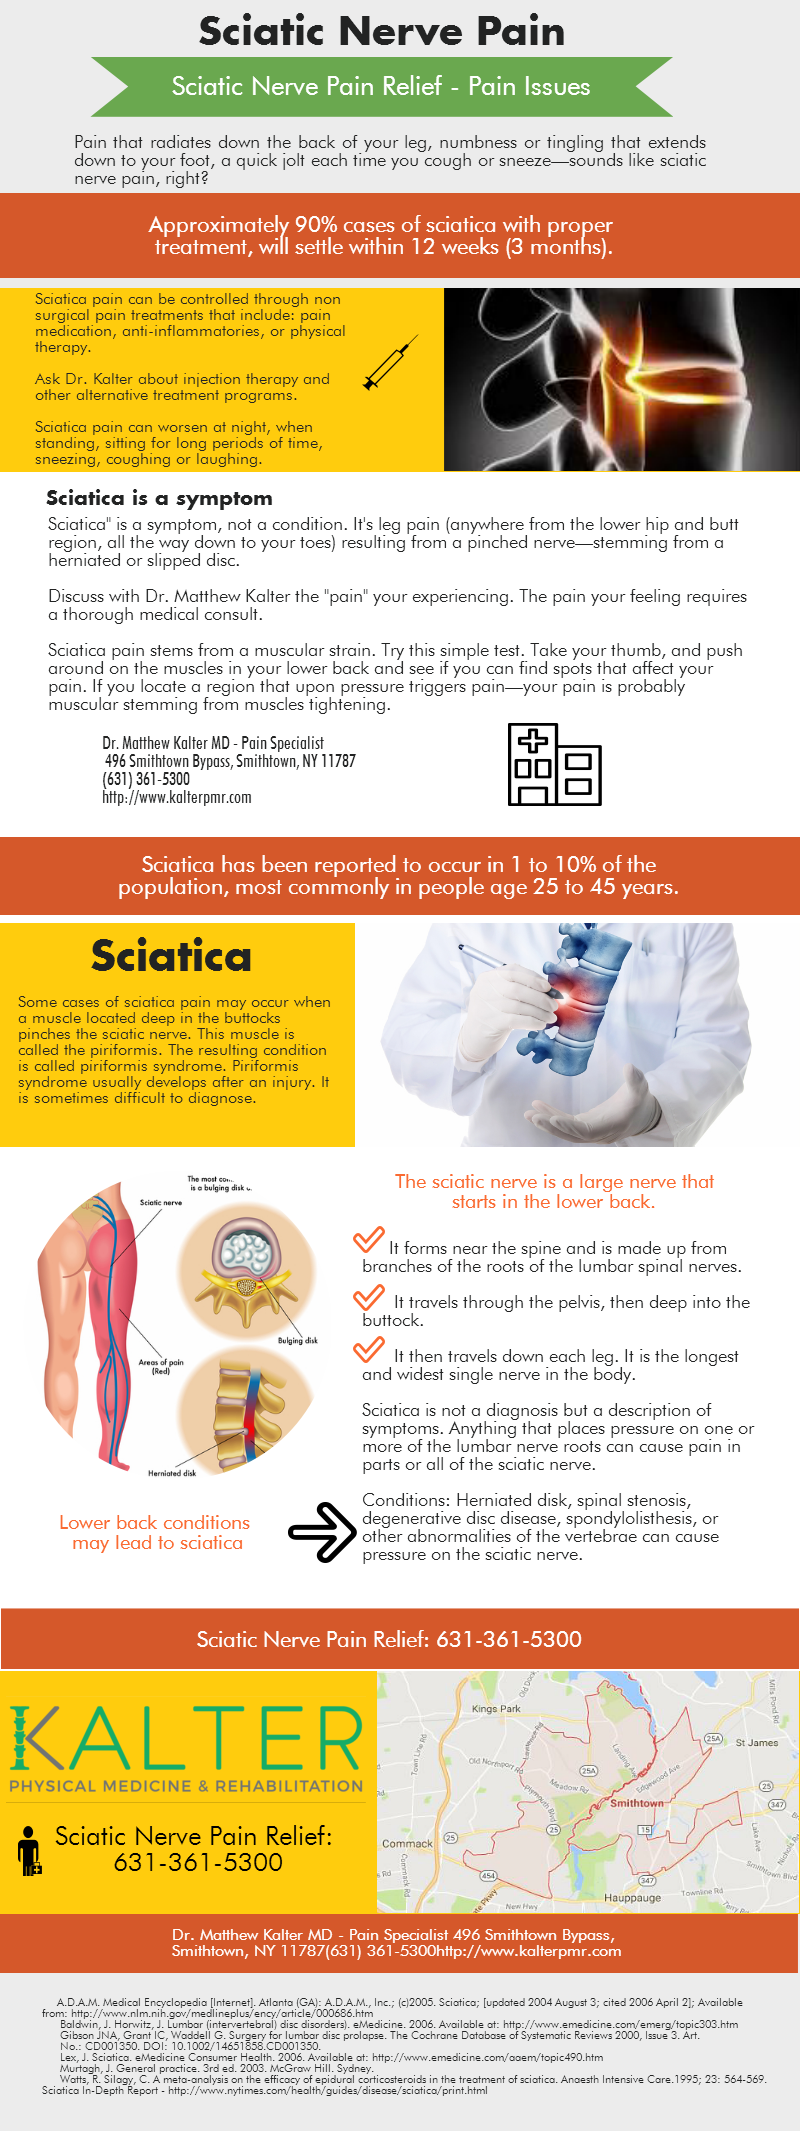 Sciatica Nerve Pain Infographic - Sciatica pain symptoms include weakness, numbness, or tingling in the leg. Sciatica nerve pain is caused by injury to or pressure on the sciatic nerve. Sciatica is a symptom of another medical condition.